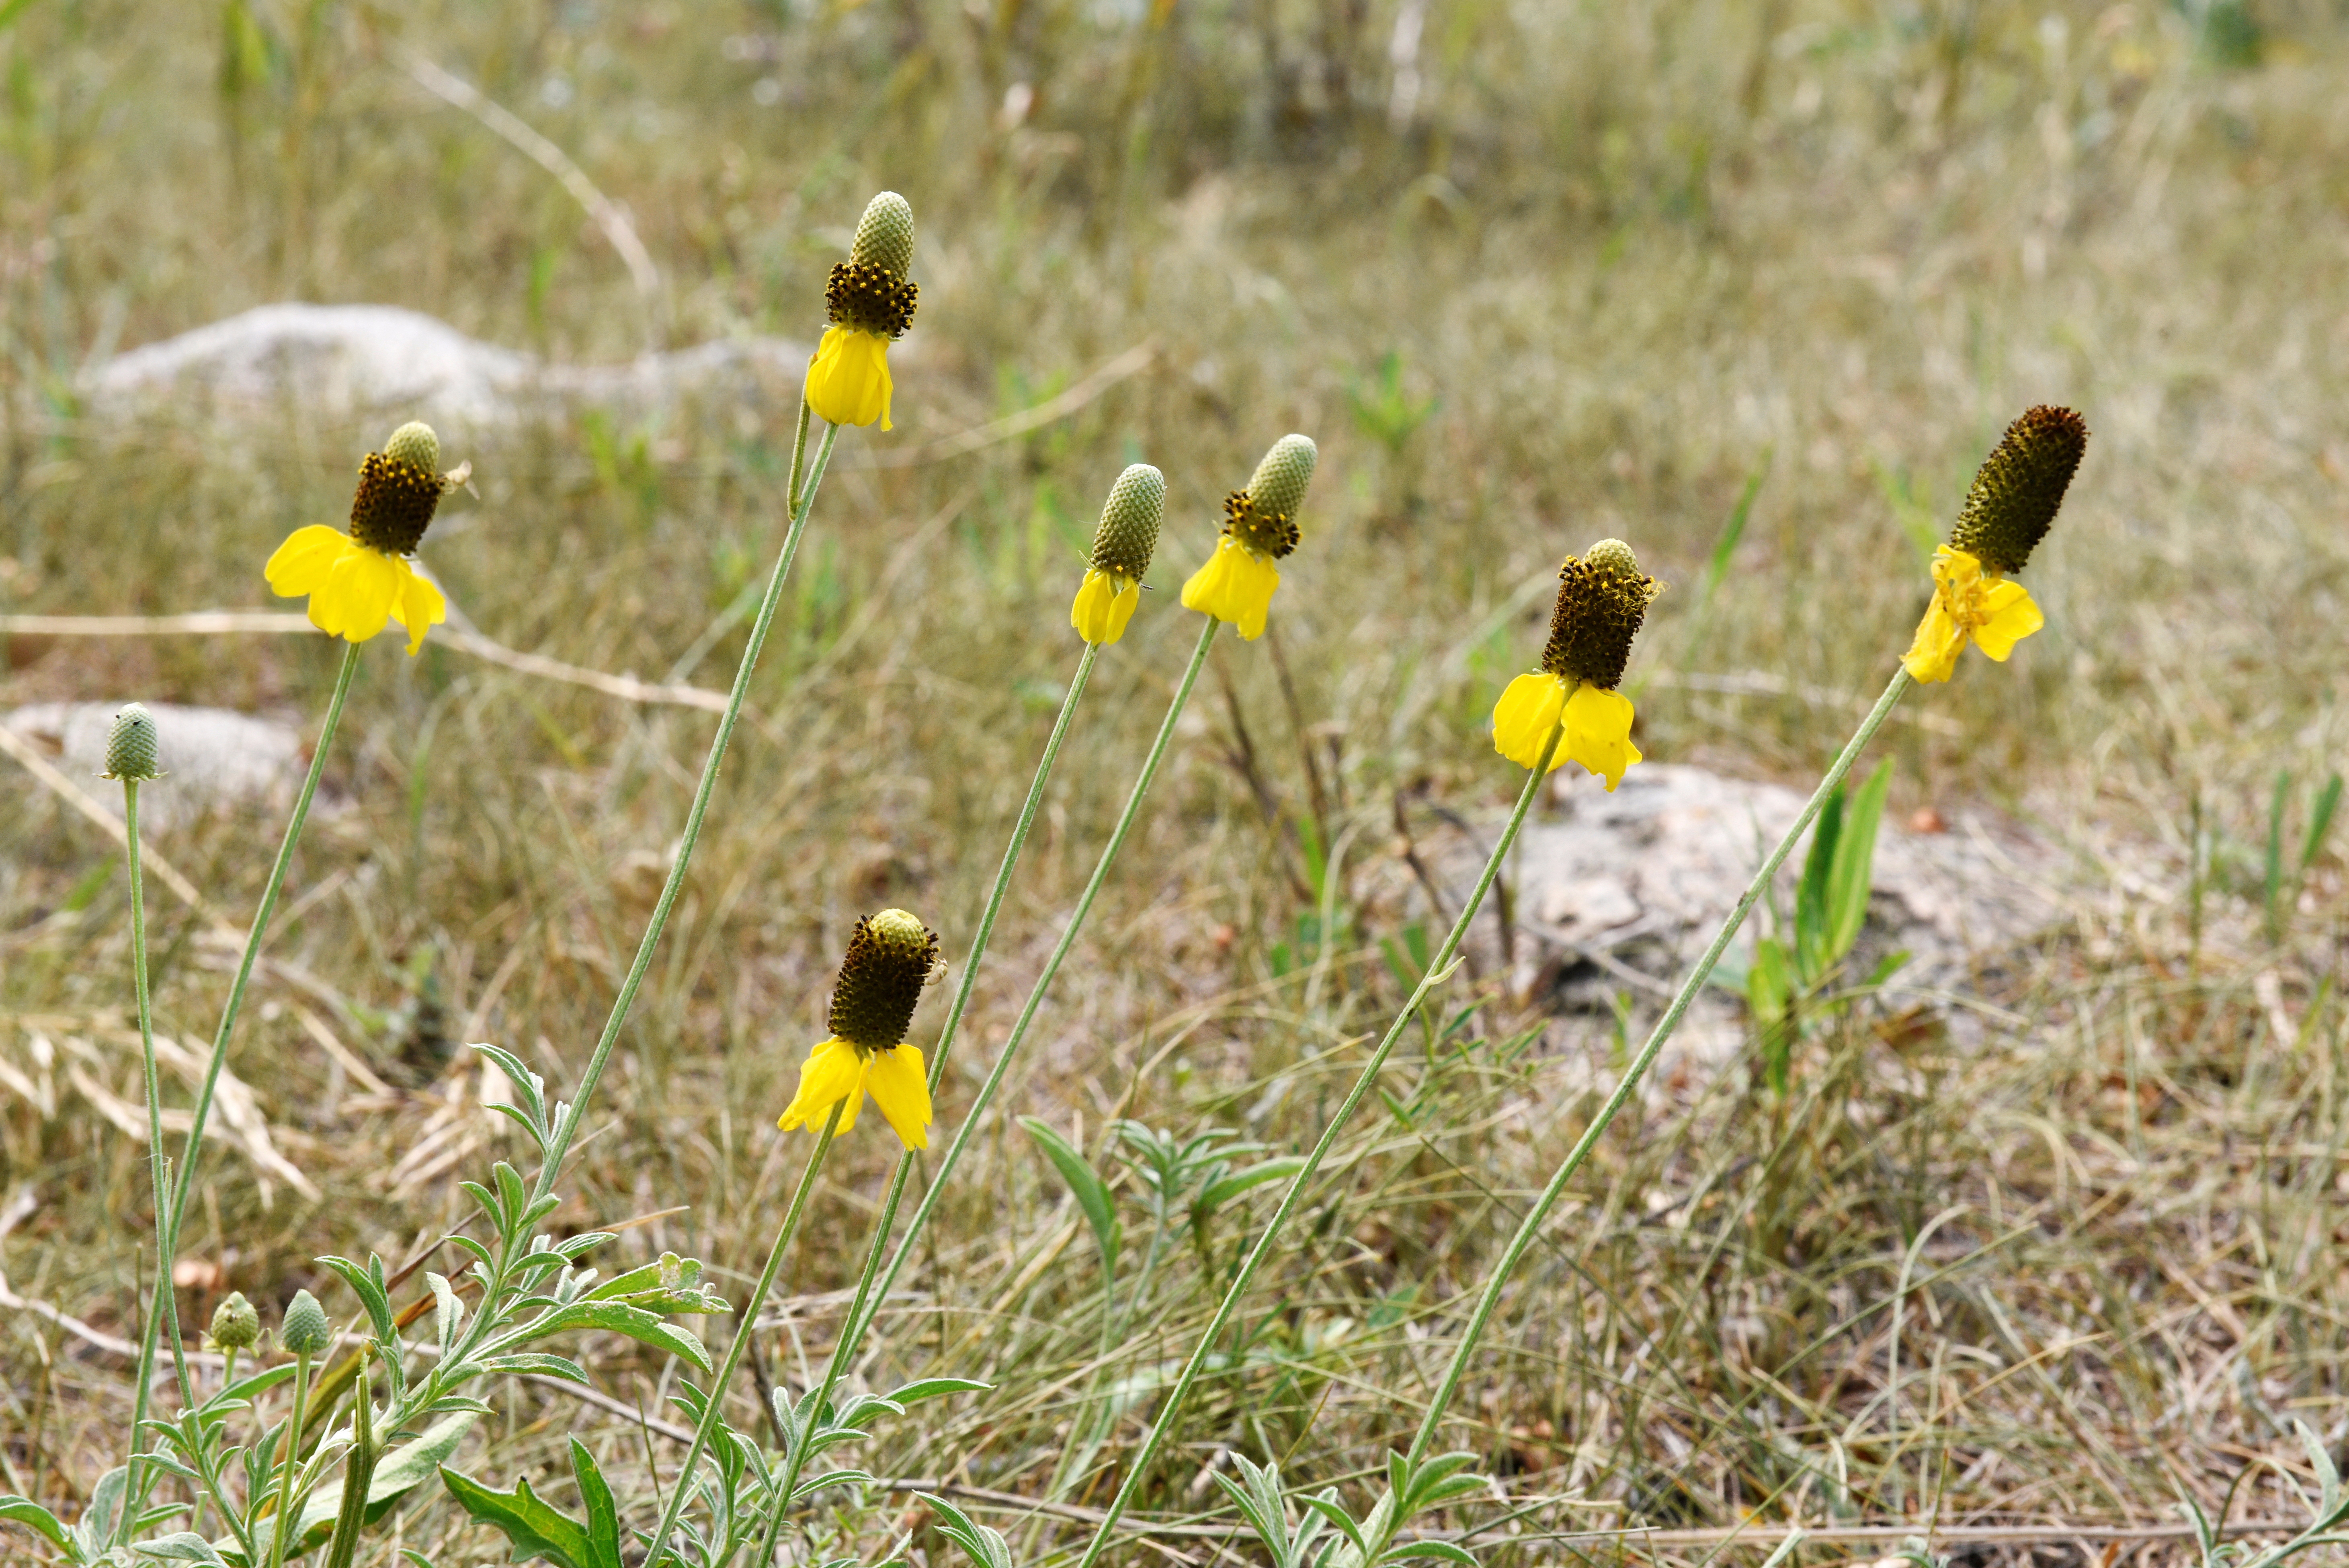 Drought-stressed yellow coneflowers that honey bees rely on for nectar are pictured in Gackle